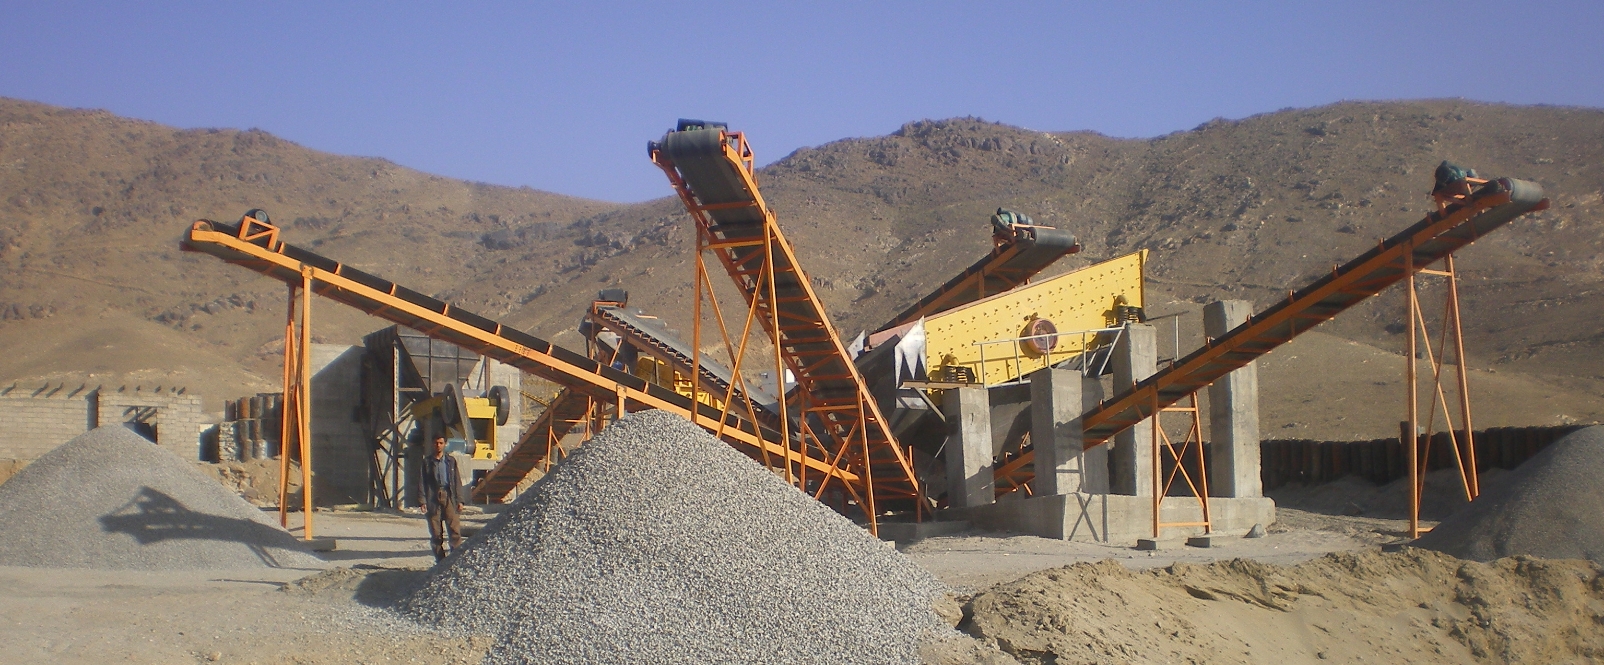 stationary type gravel crushing plants for sale